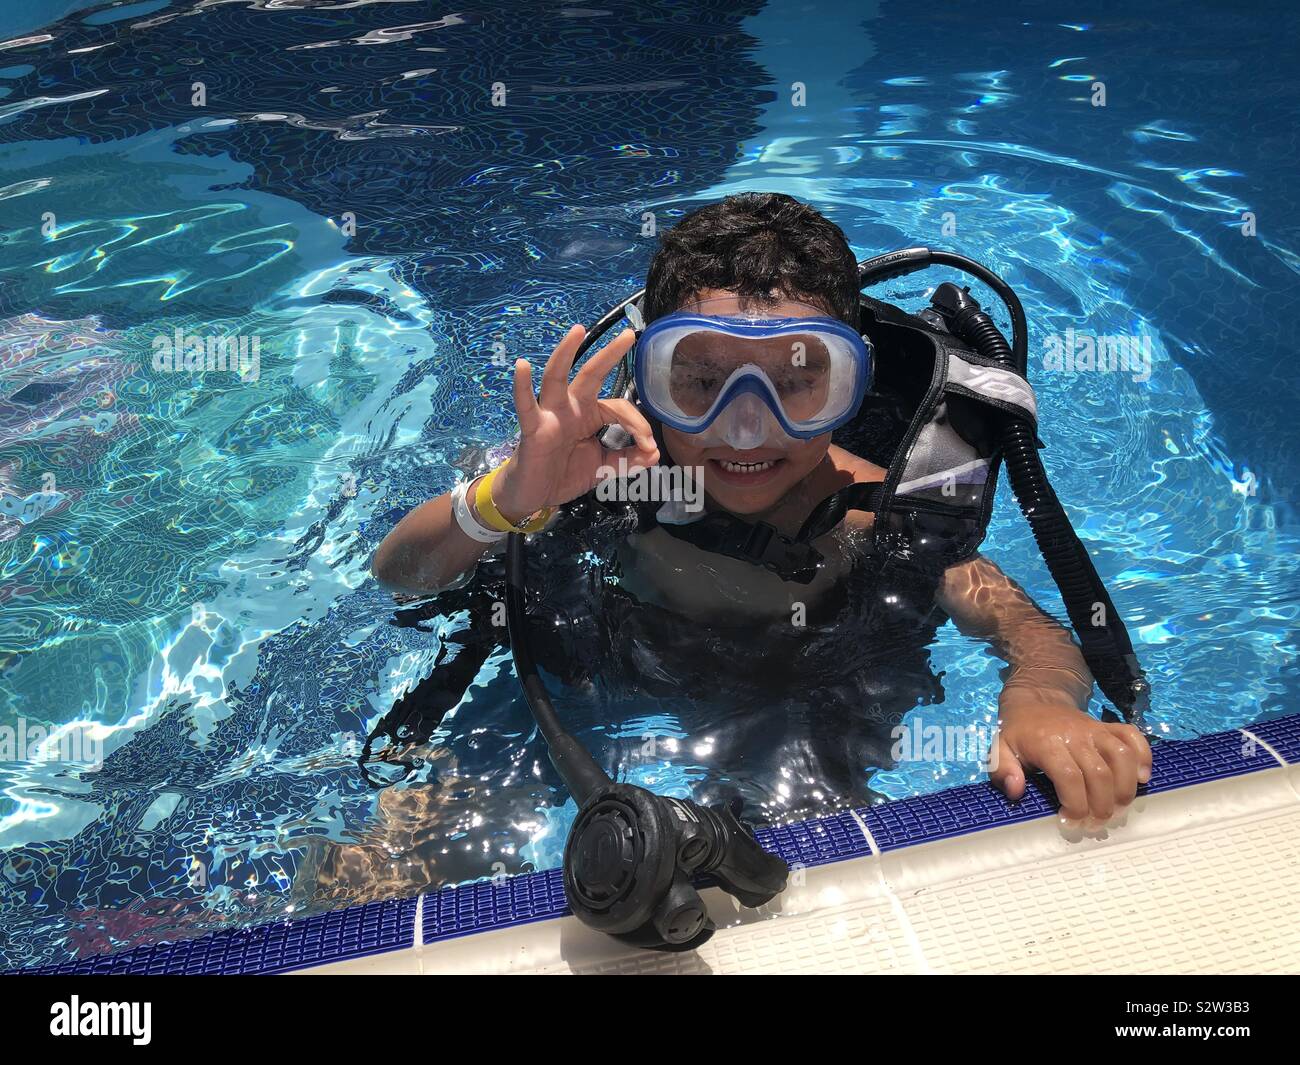 Little boy learning to scuba dive in pool Stock Photo